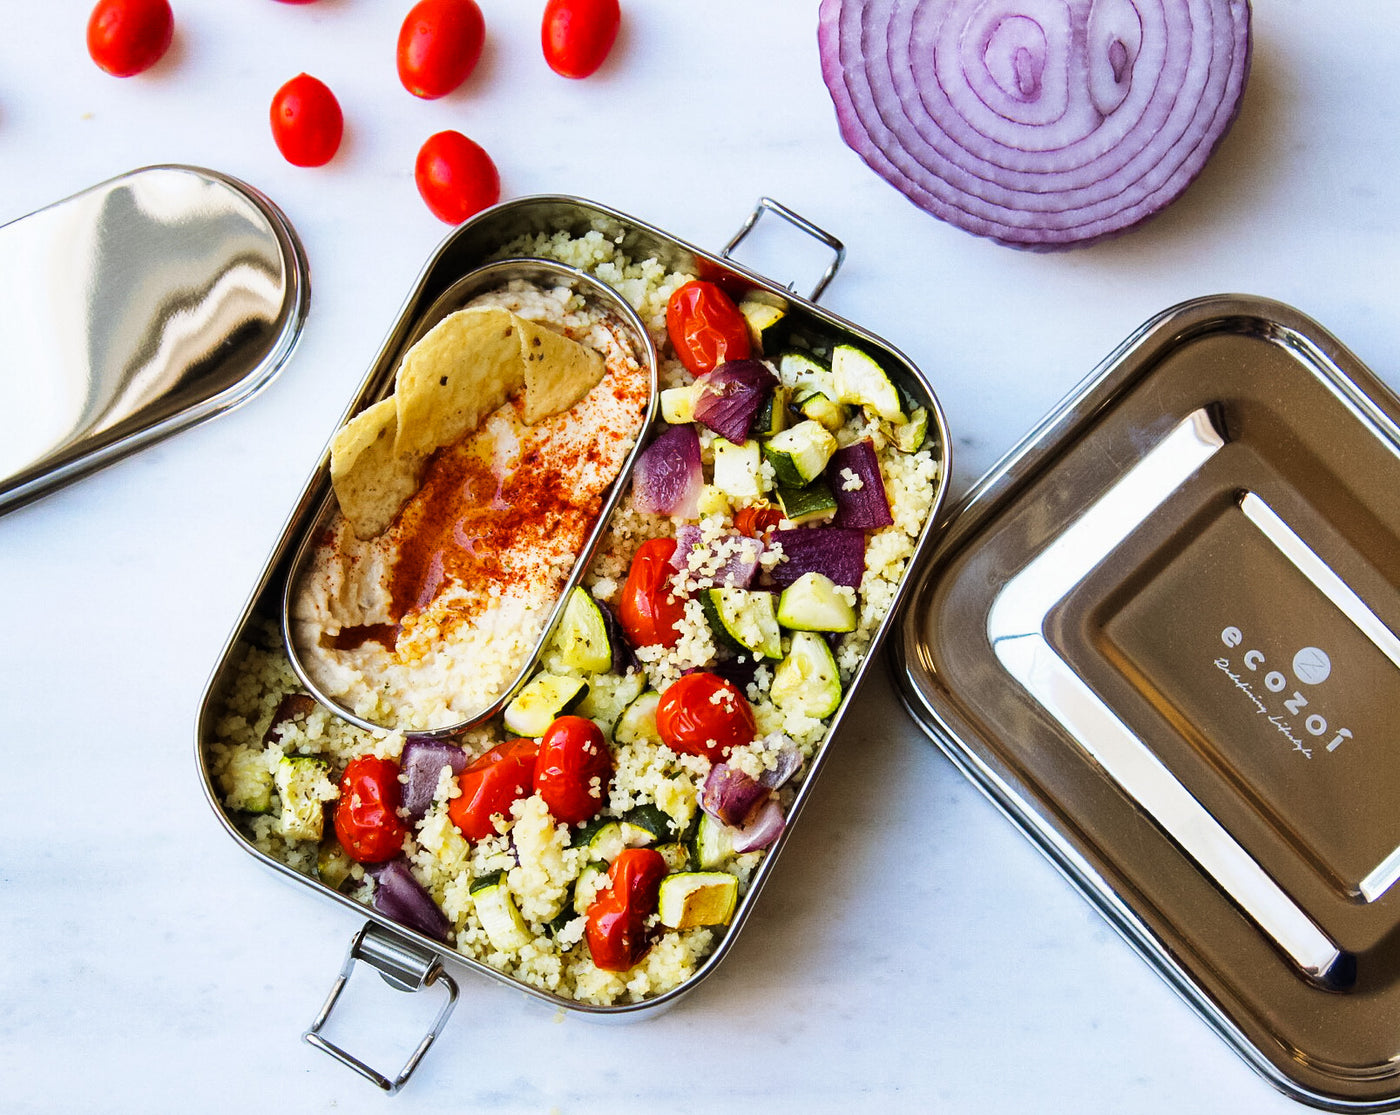 Reasons to Switch to Stainless Steel Lunch Boxes - Ecococoon ™